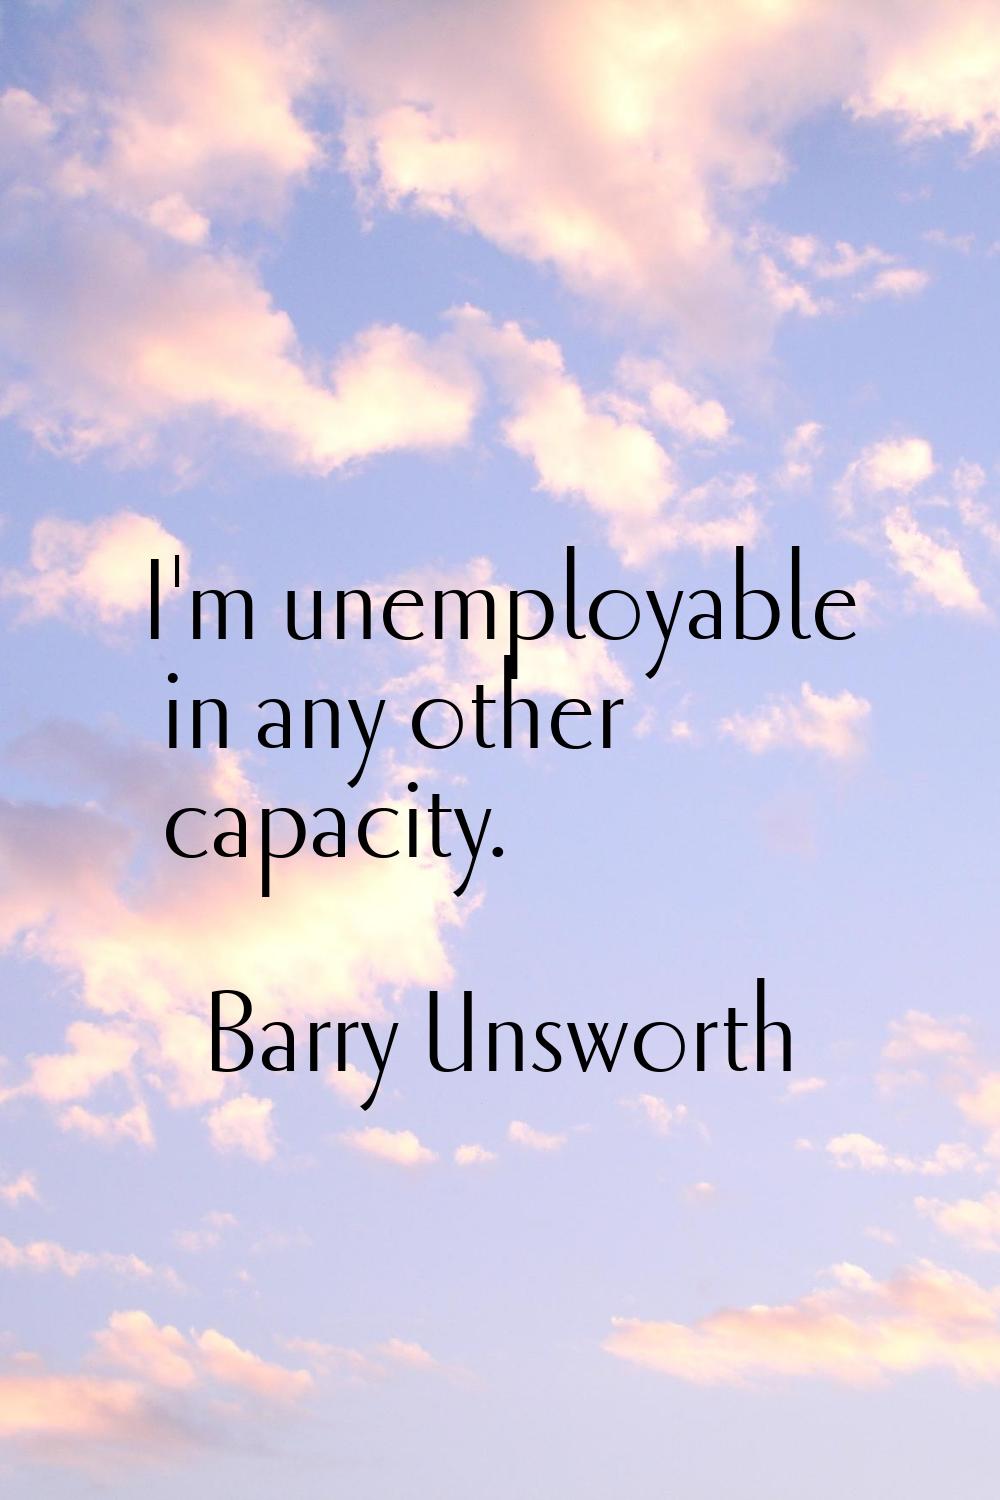 I'm unemployable in any other capacity.